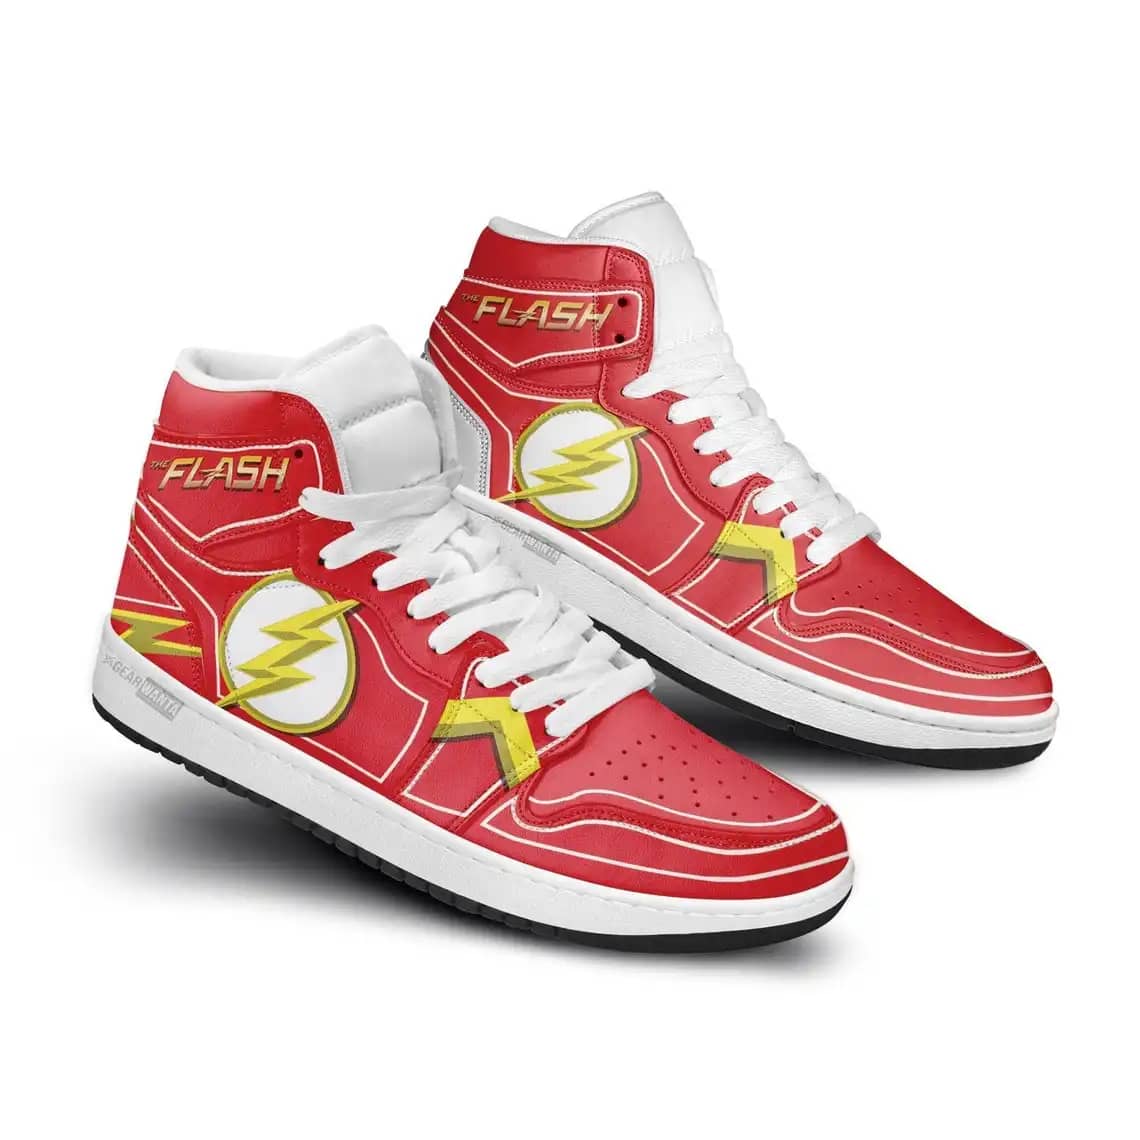 The Flash Super Heroes For Movie Fans - Custom Anime Sneaker For Men And Women Air Jordan Shoes